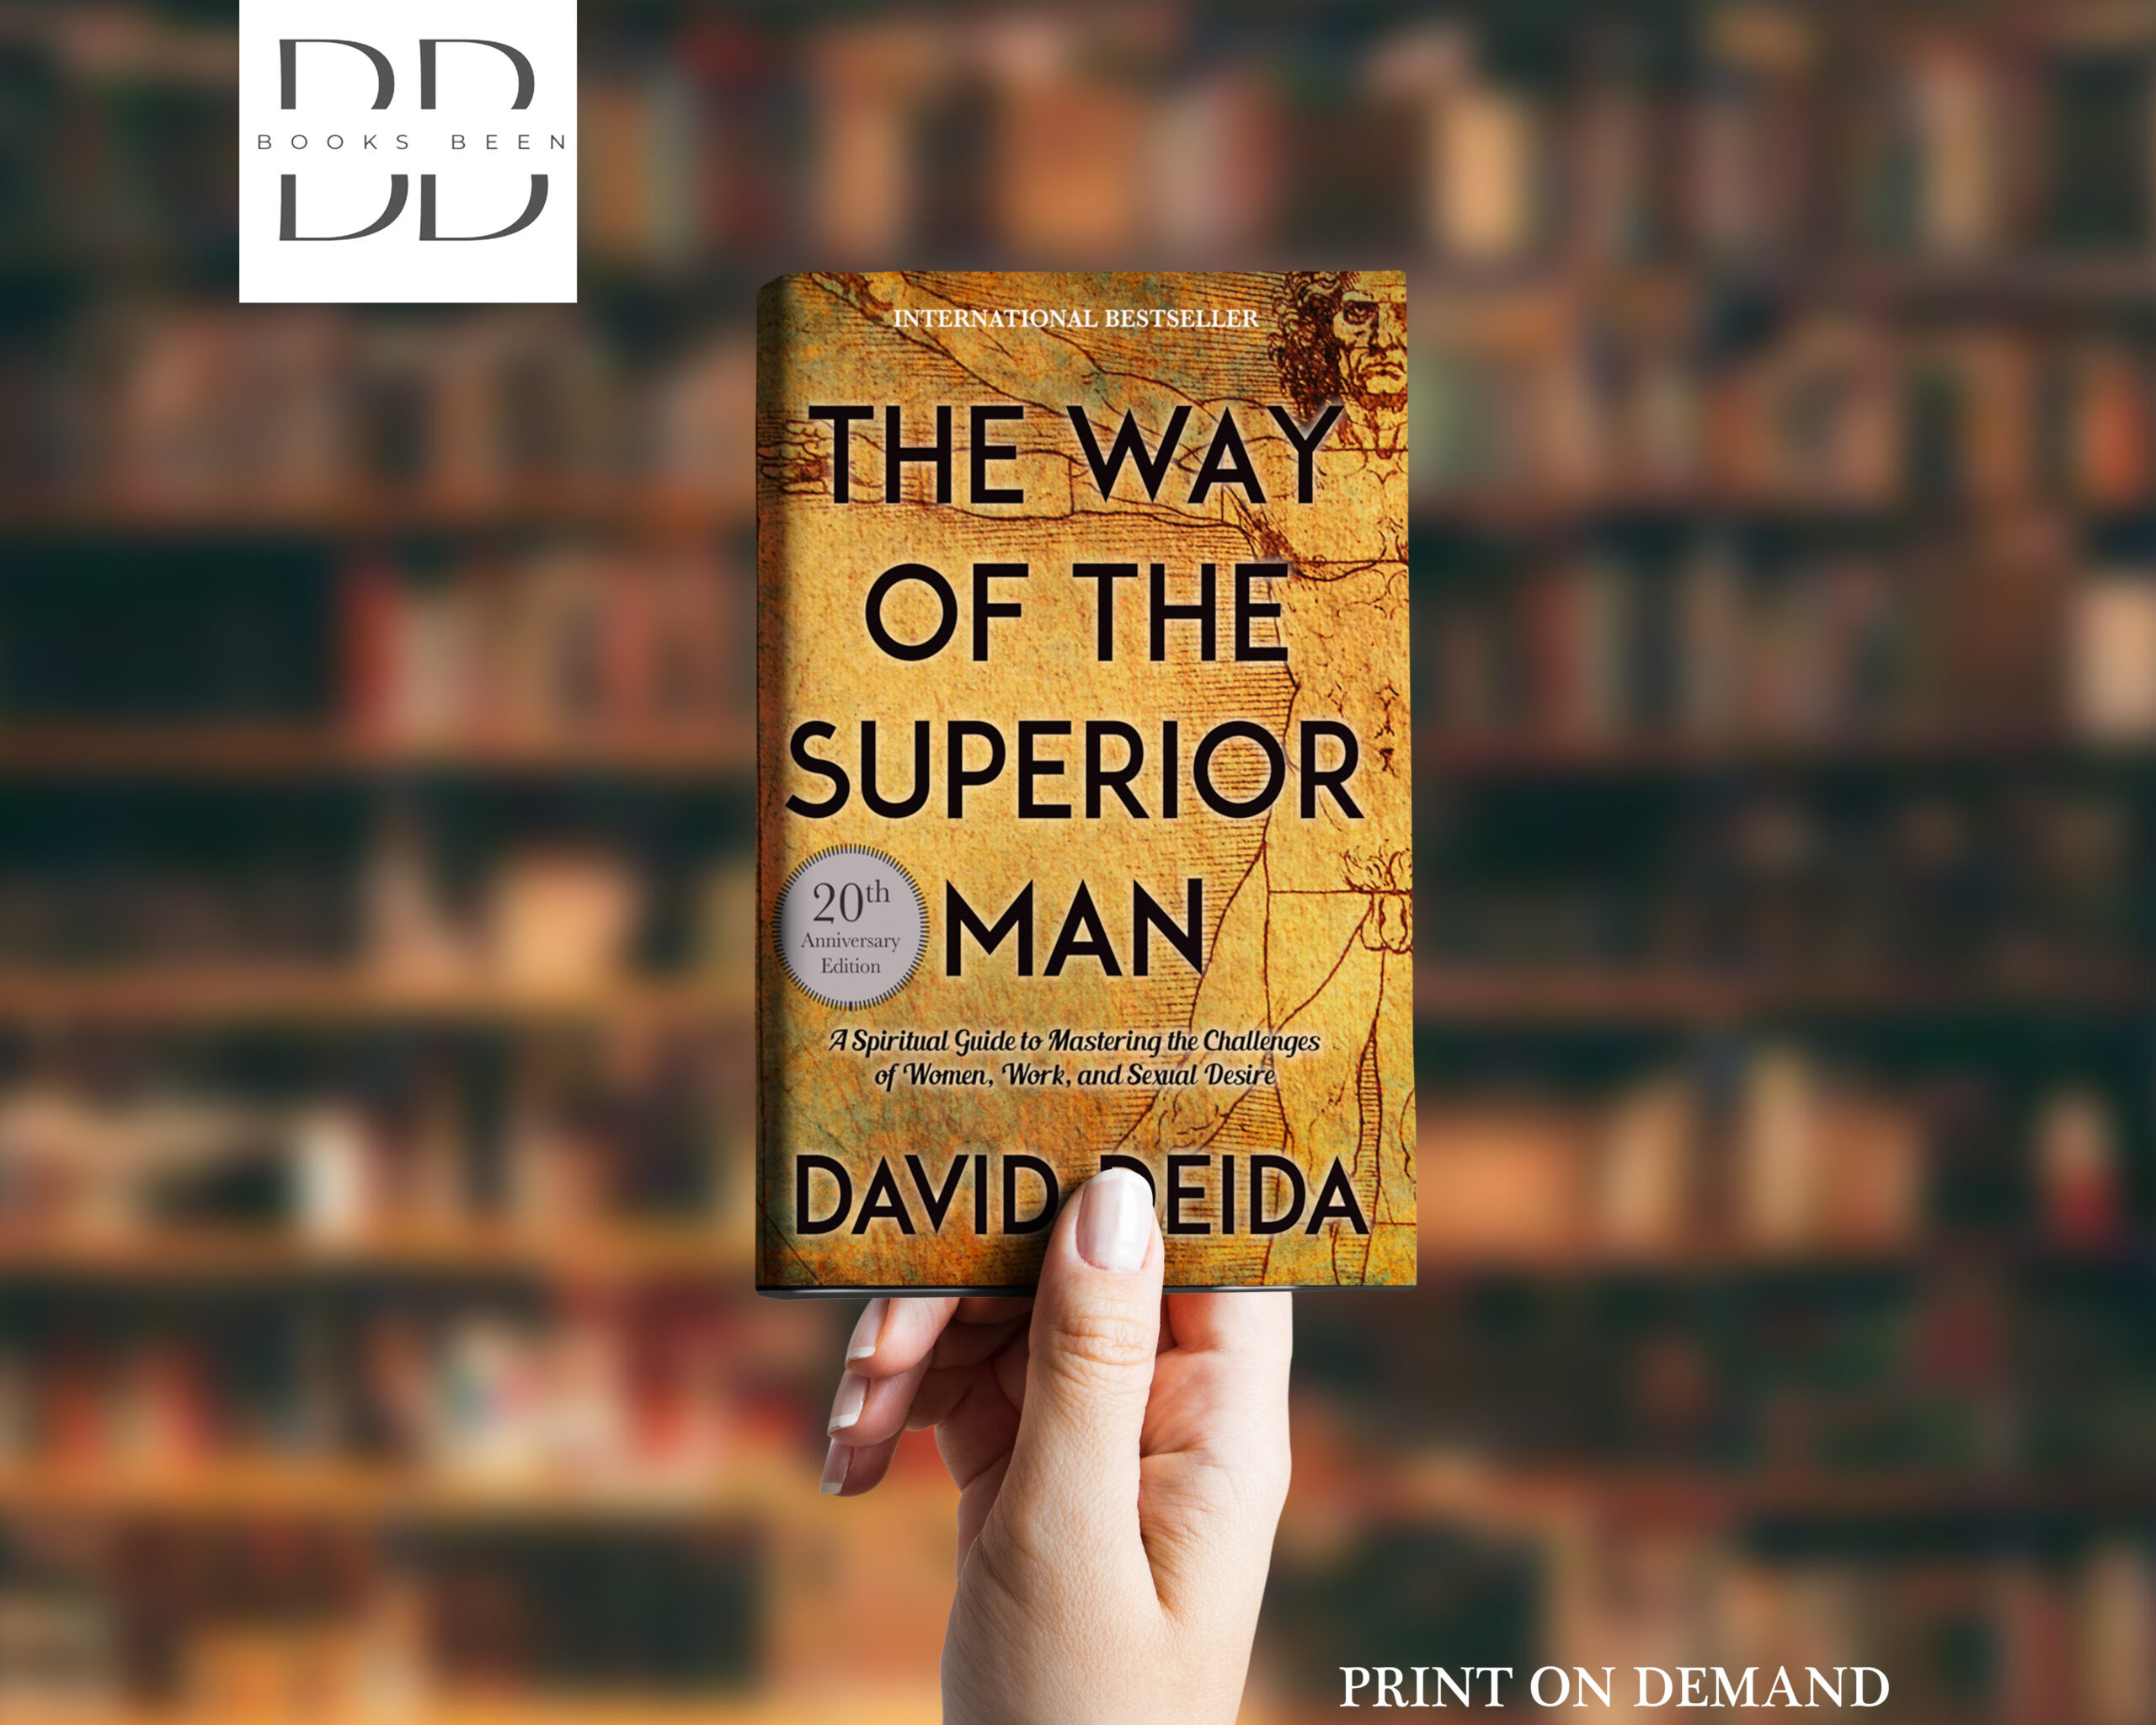 The Way of the Superior Man Book by David Deida - Booksbeen